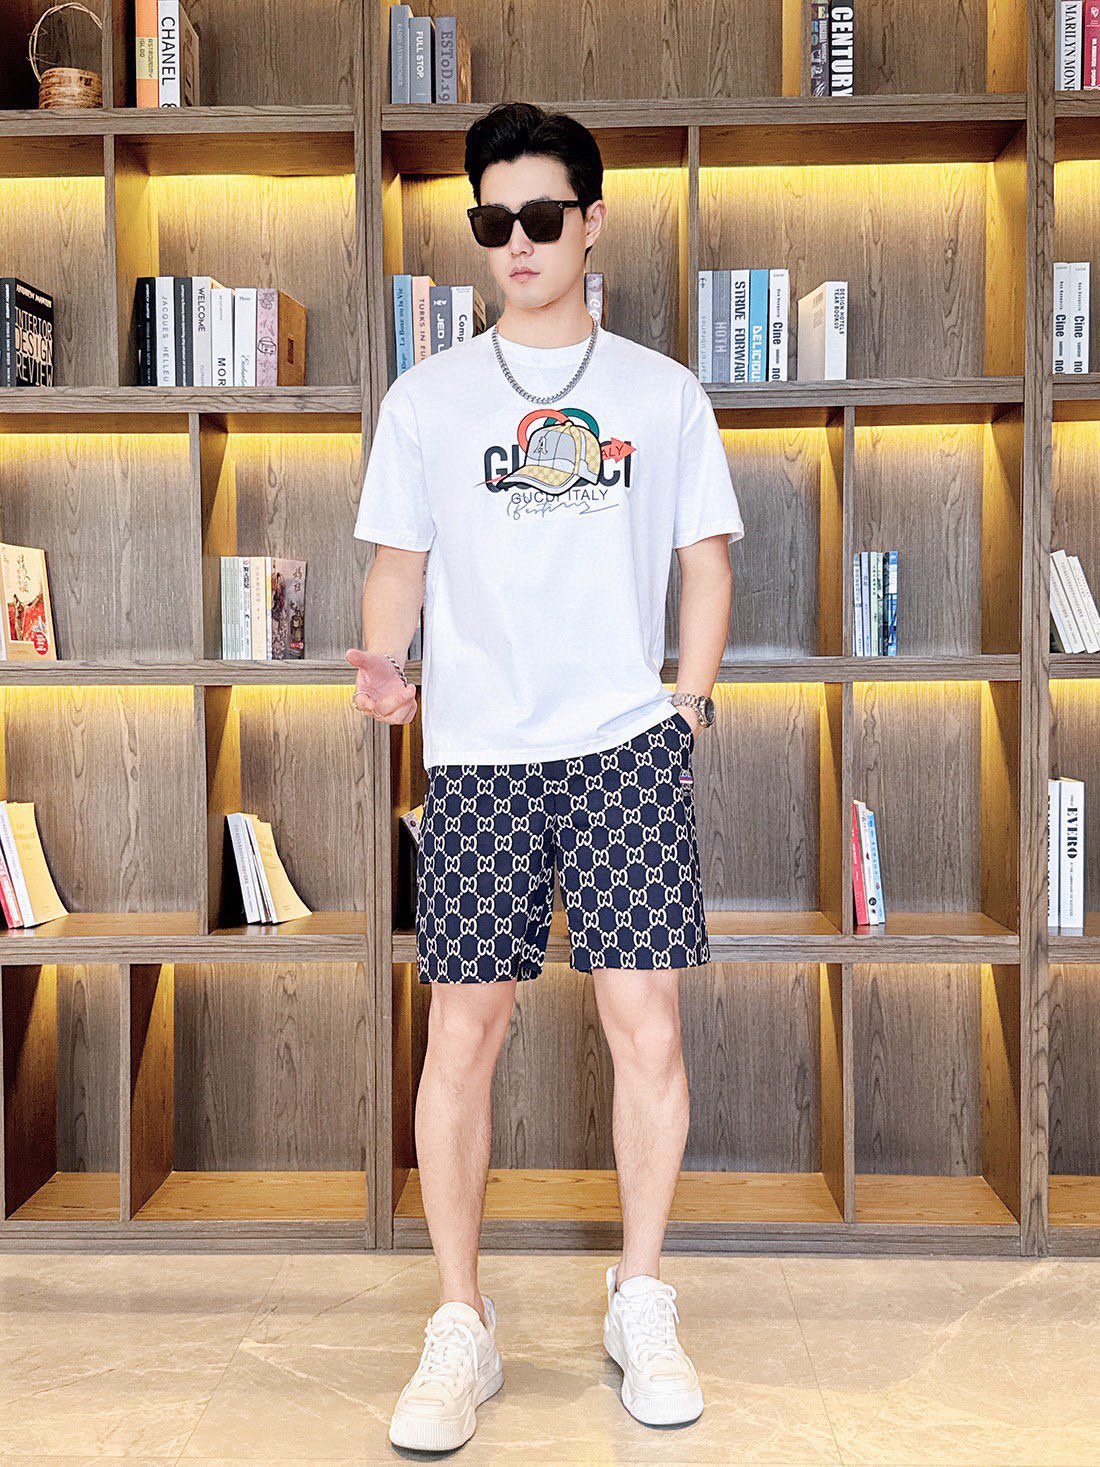 Gucci Clothing Shorts T-Shirt Two Piece Outfits & Matching Sets for sale online
 Men Summer Collection Fashion Short Sleeve